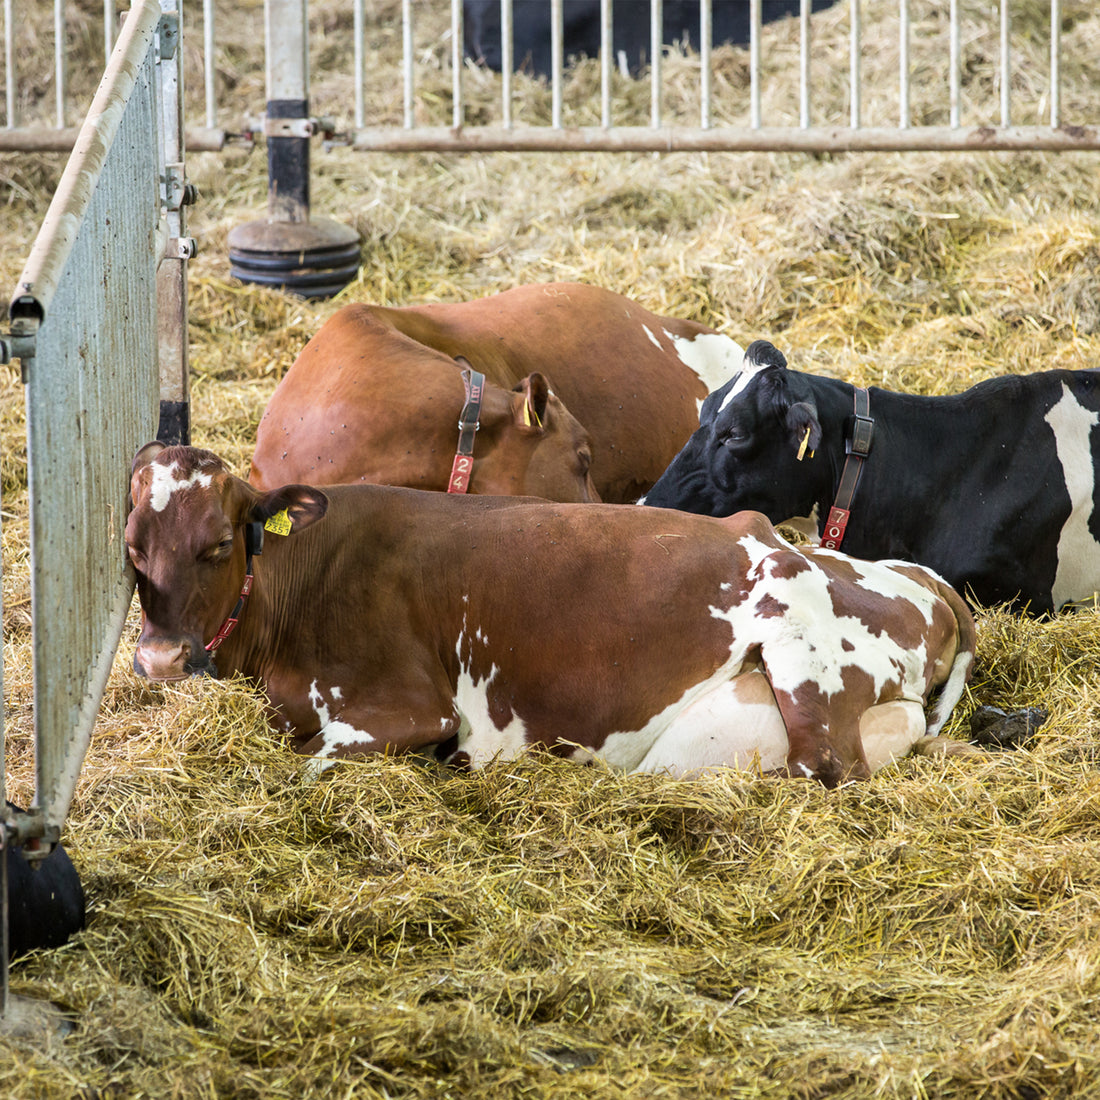 A renovation project is an excellent time to update your farm’s transition cow management